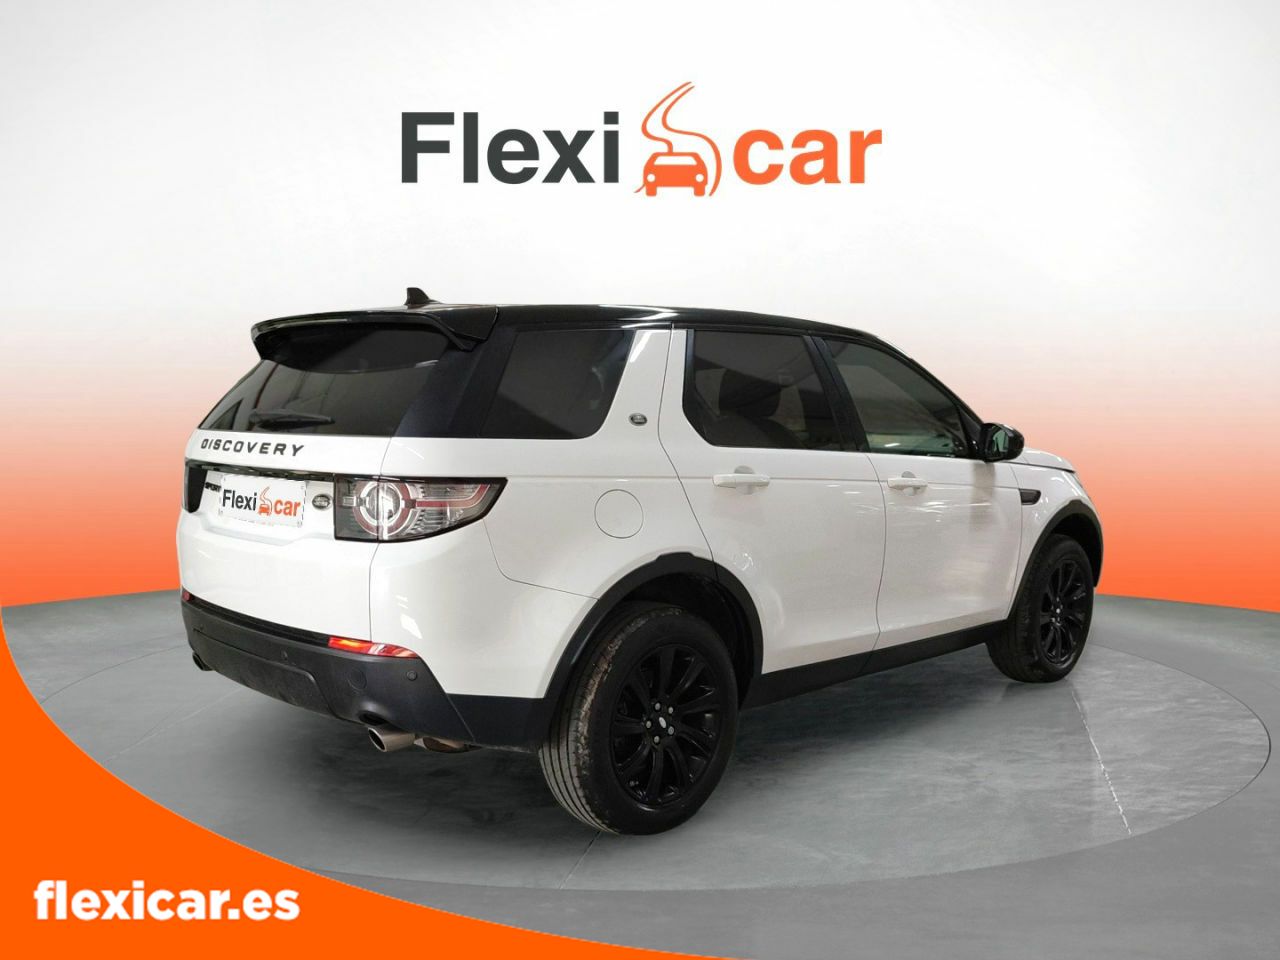 Foto Land-Rover Discovery 8